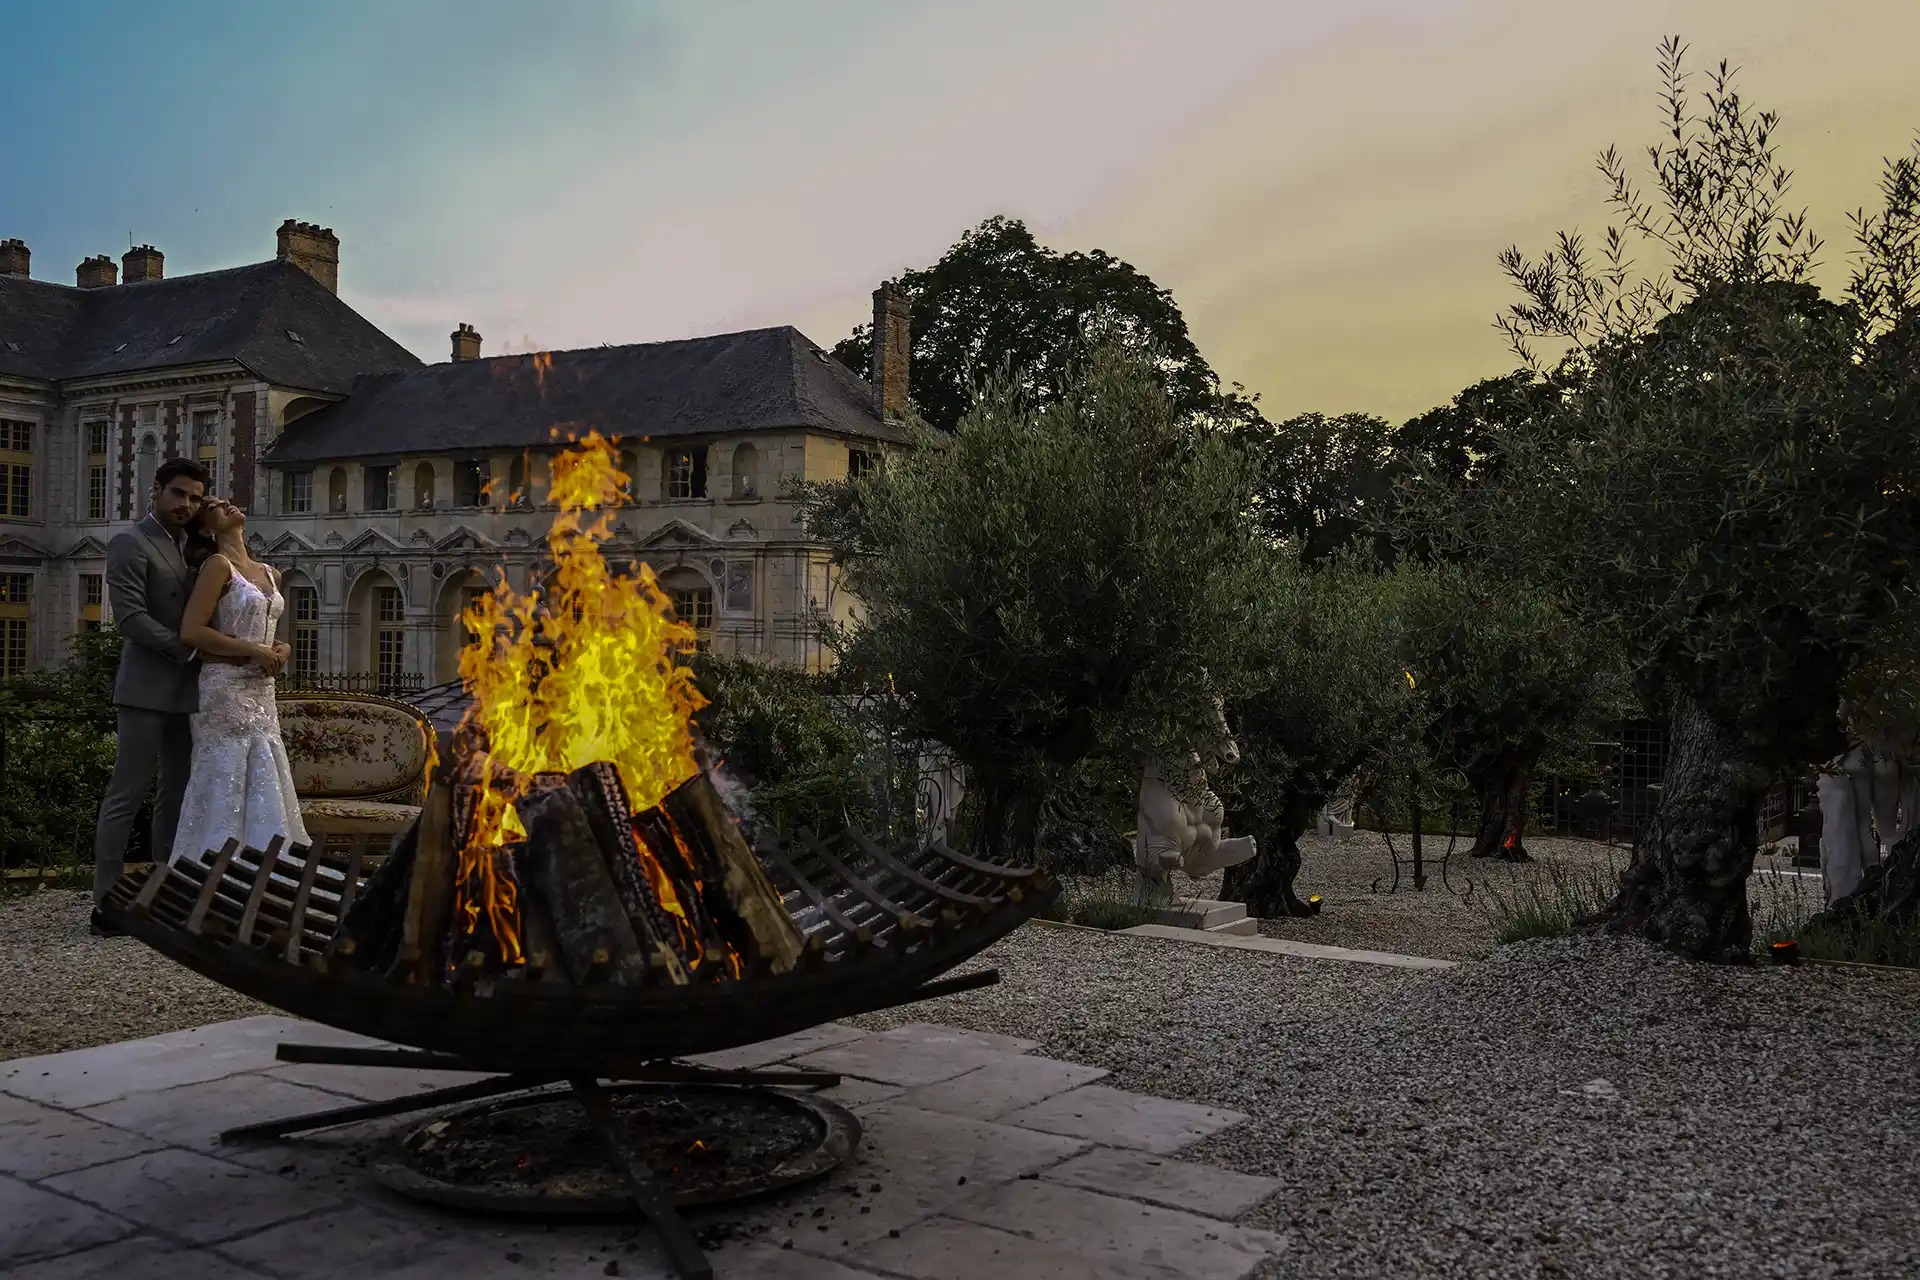 In front of the chateau, organize a bonfire